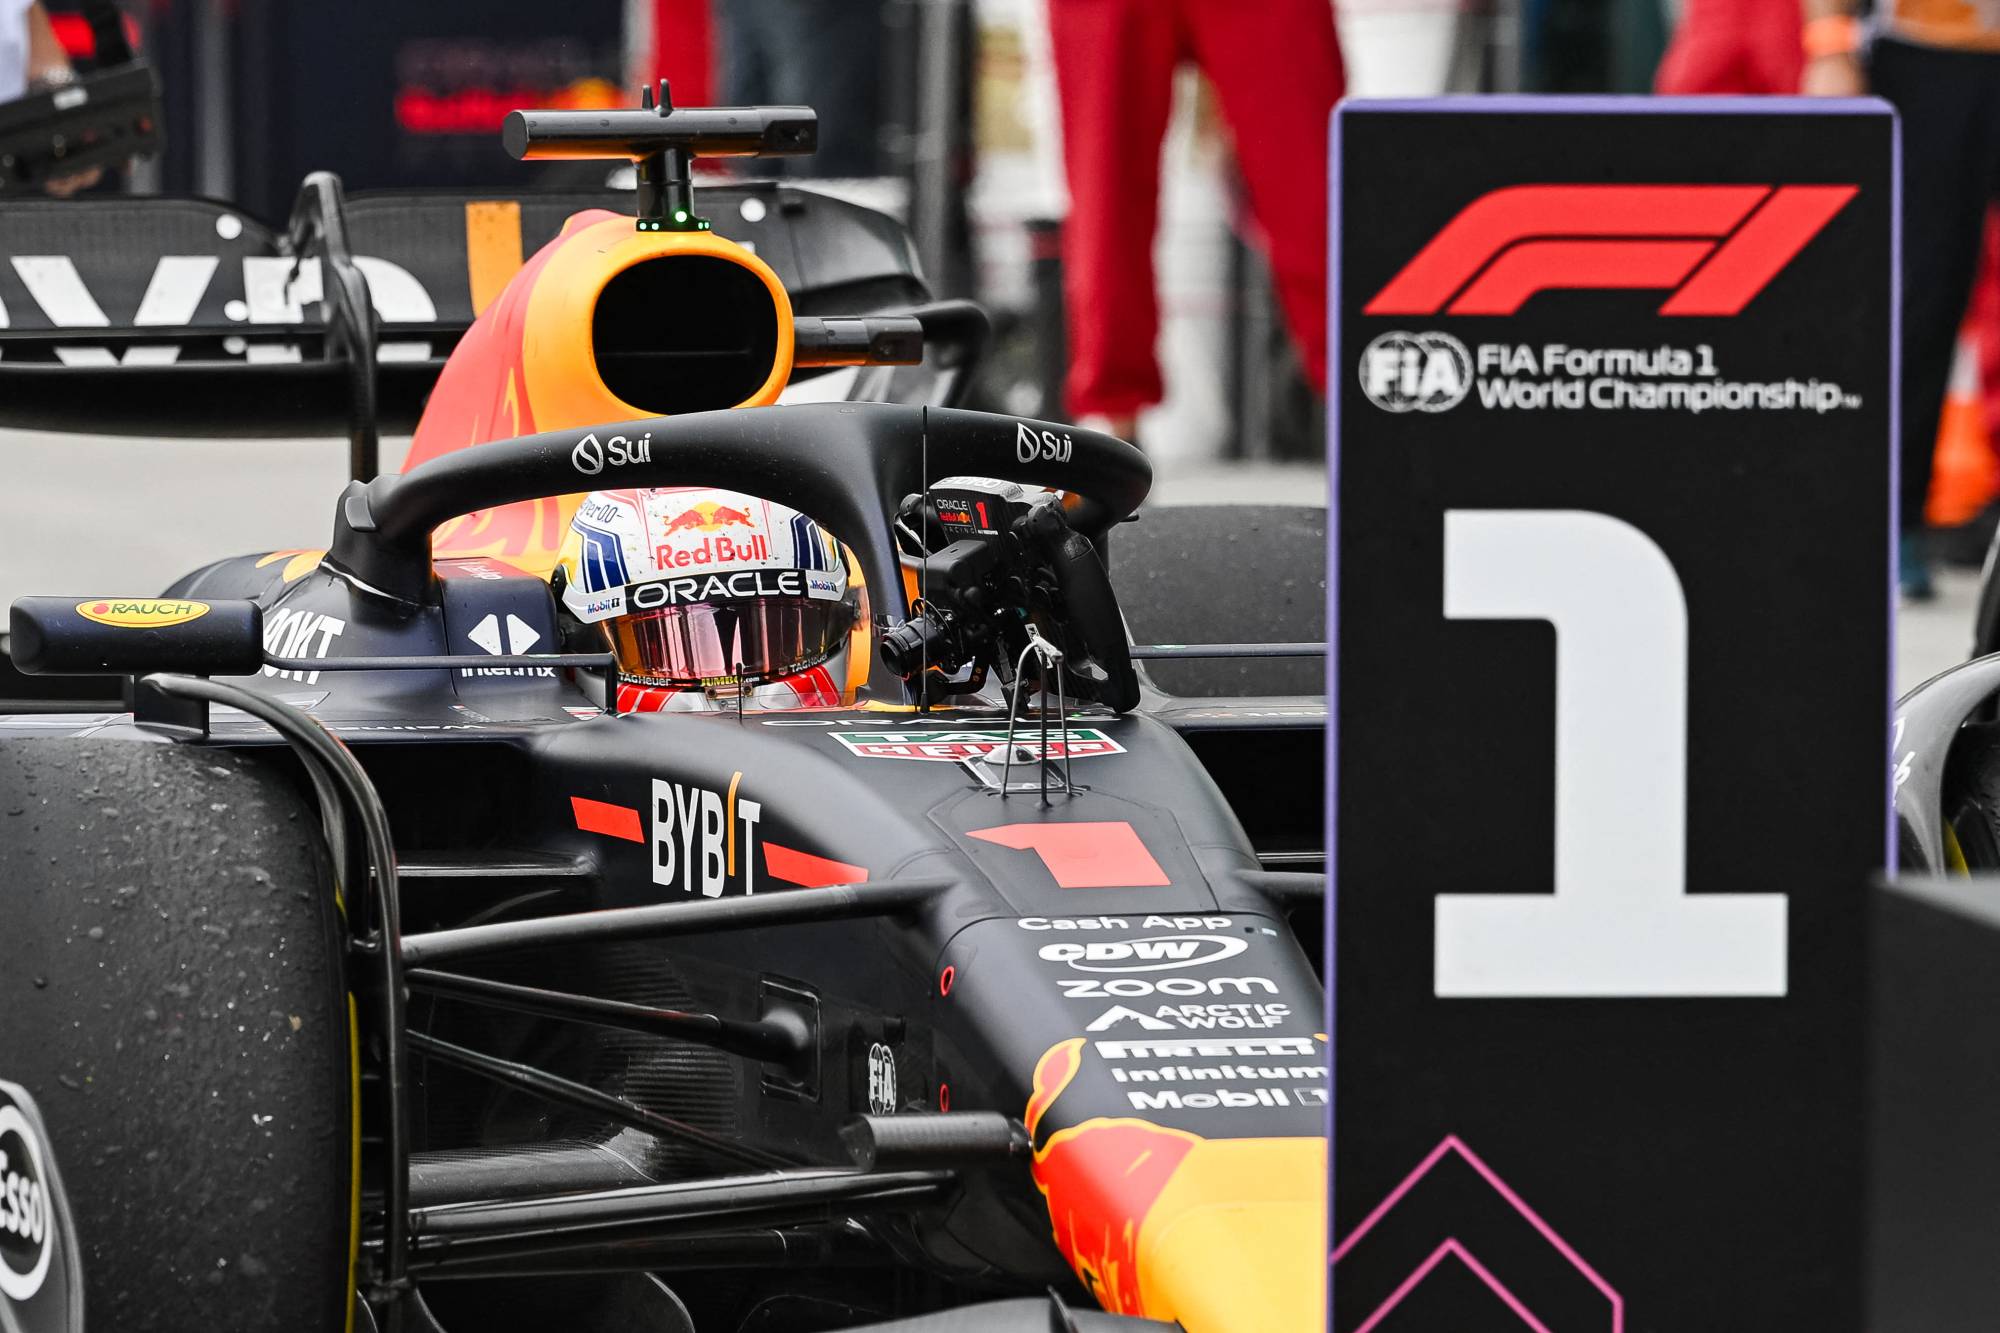 Red Bull can win everything, but the gap may be closing in Formula One